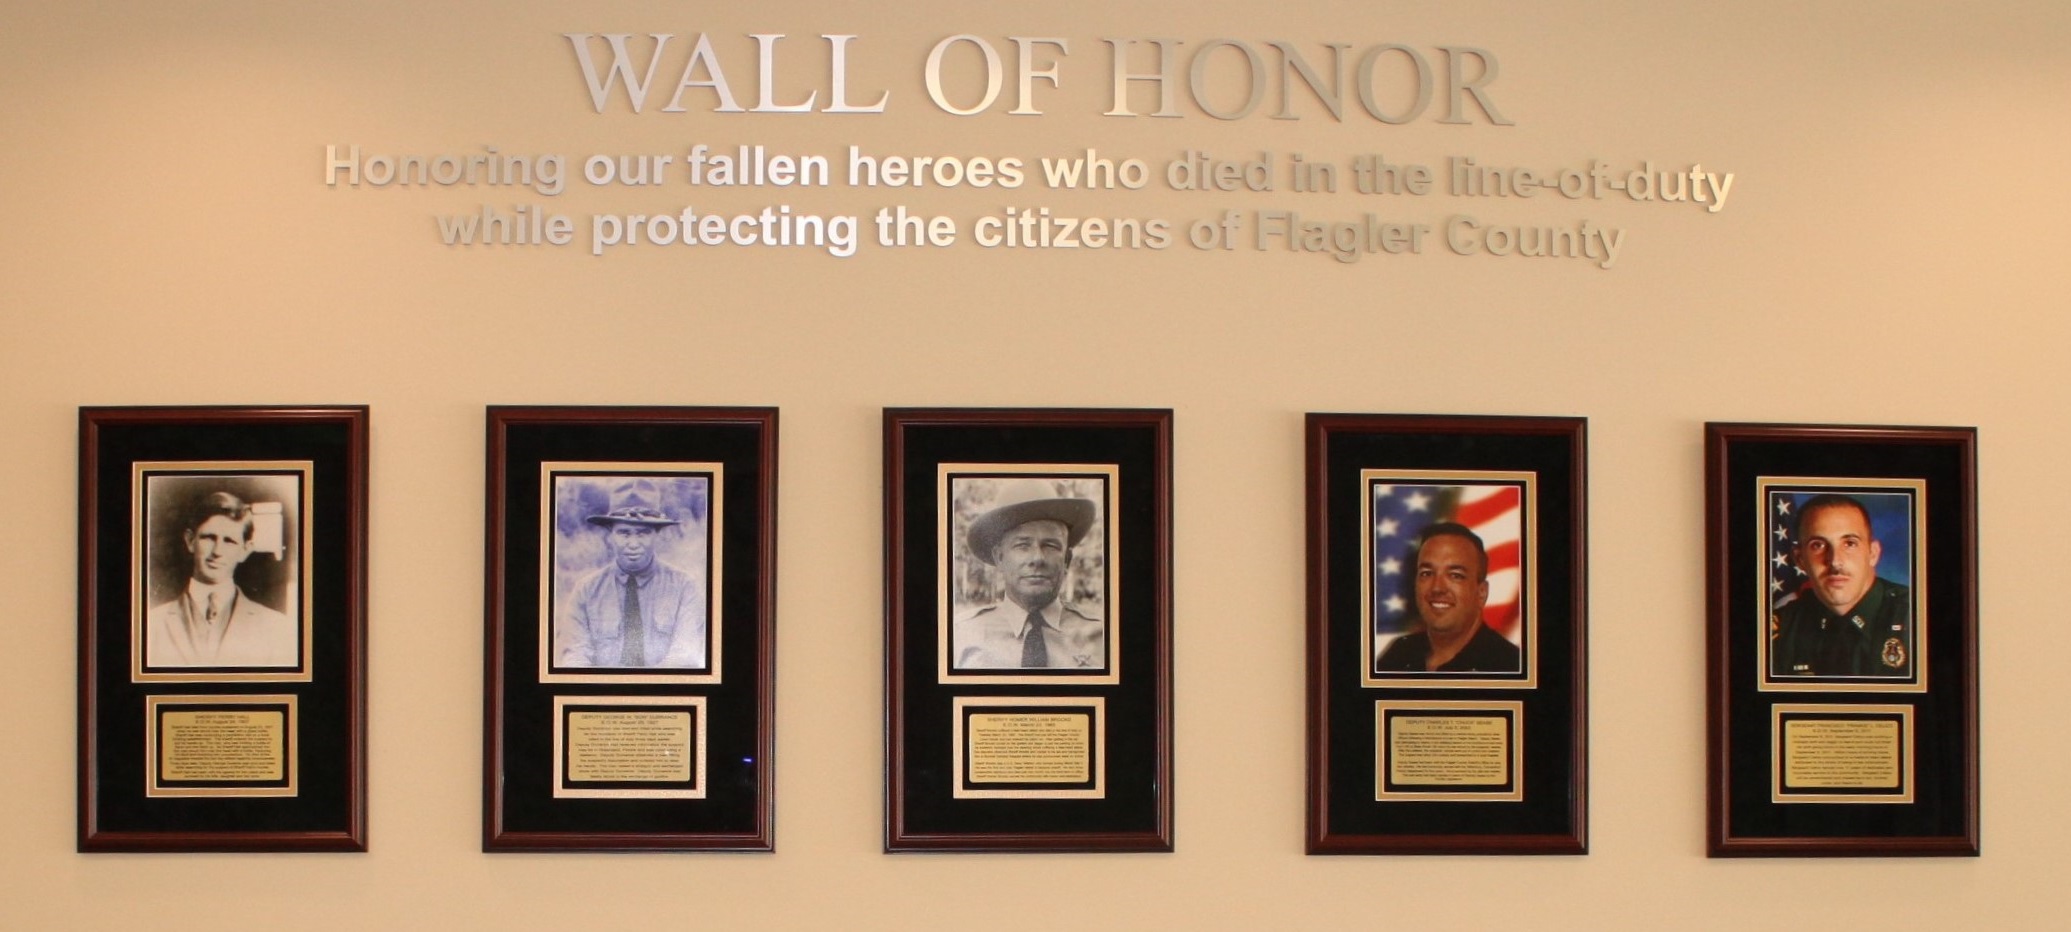 Wall of Honor, honoring our fallen heros who died in the line-of-duty while protecting the citizens of Flagler County